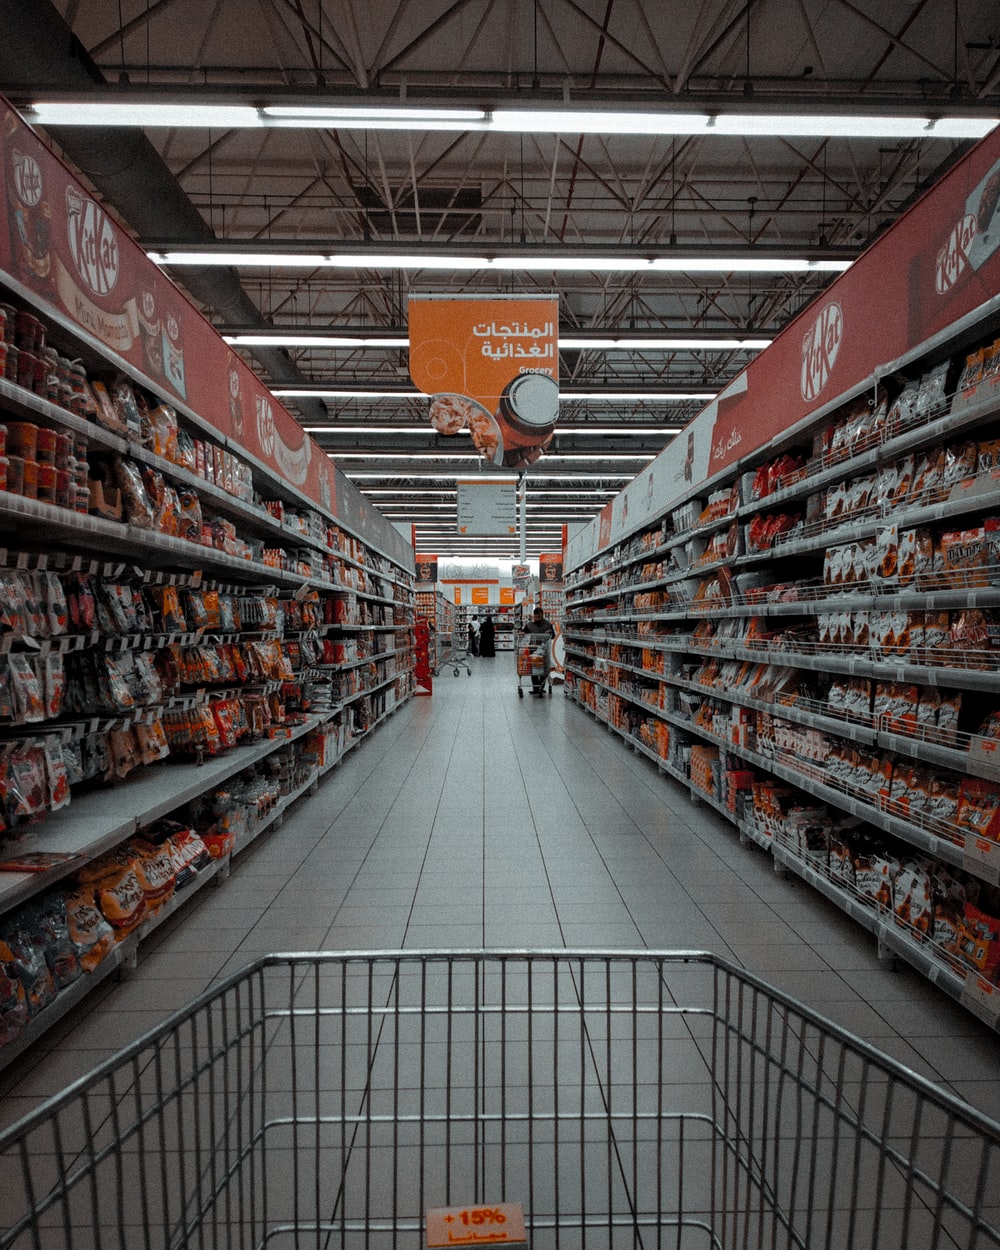 Grocery Store Aisle Picture. Download Free Image